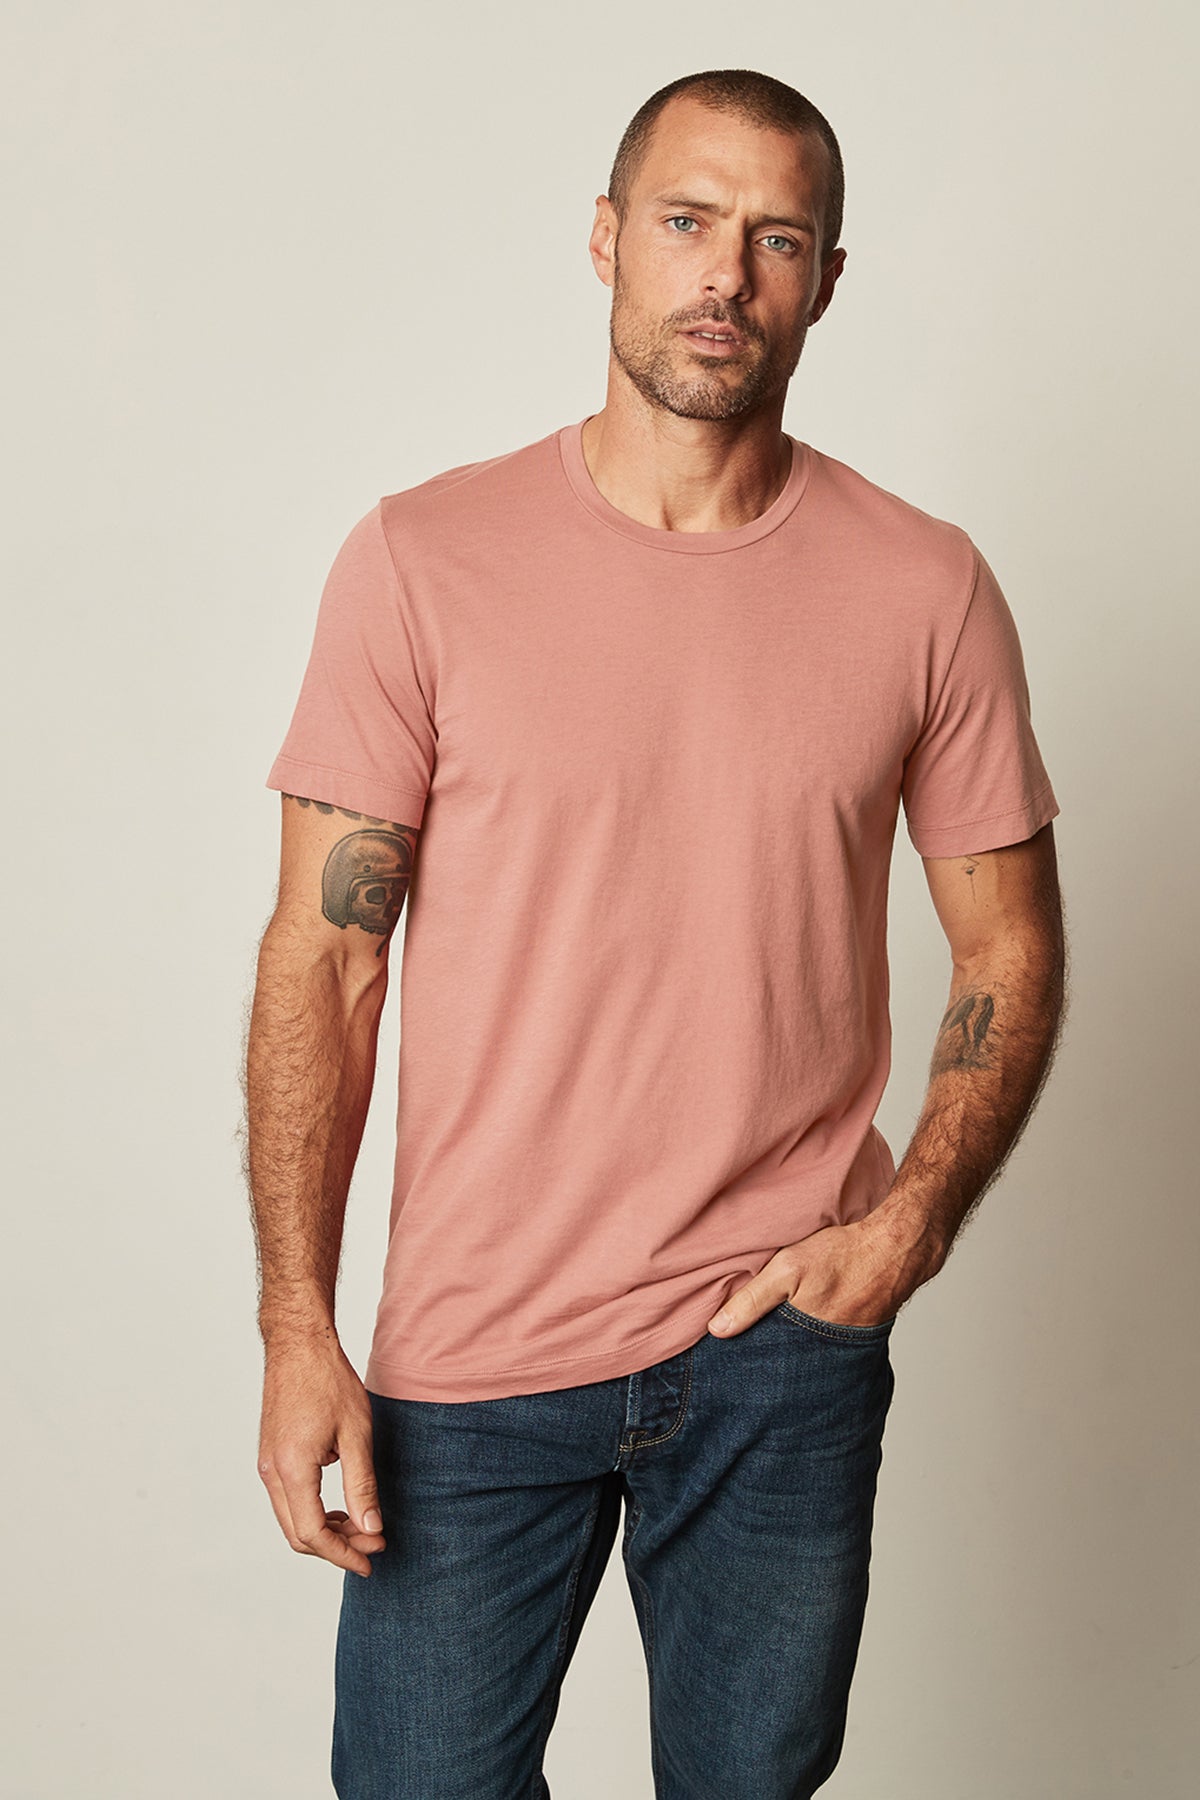 Howard Crew Neck Tee in scallop with blue denim front-26630398869697